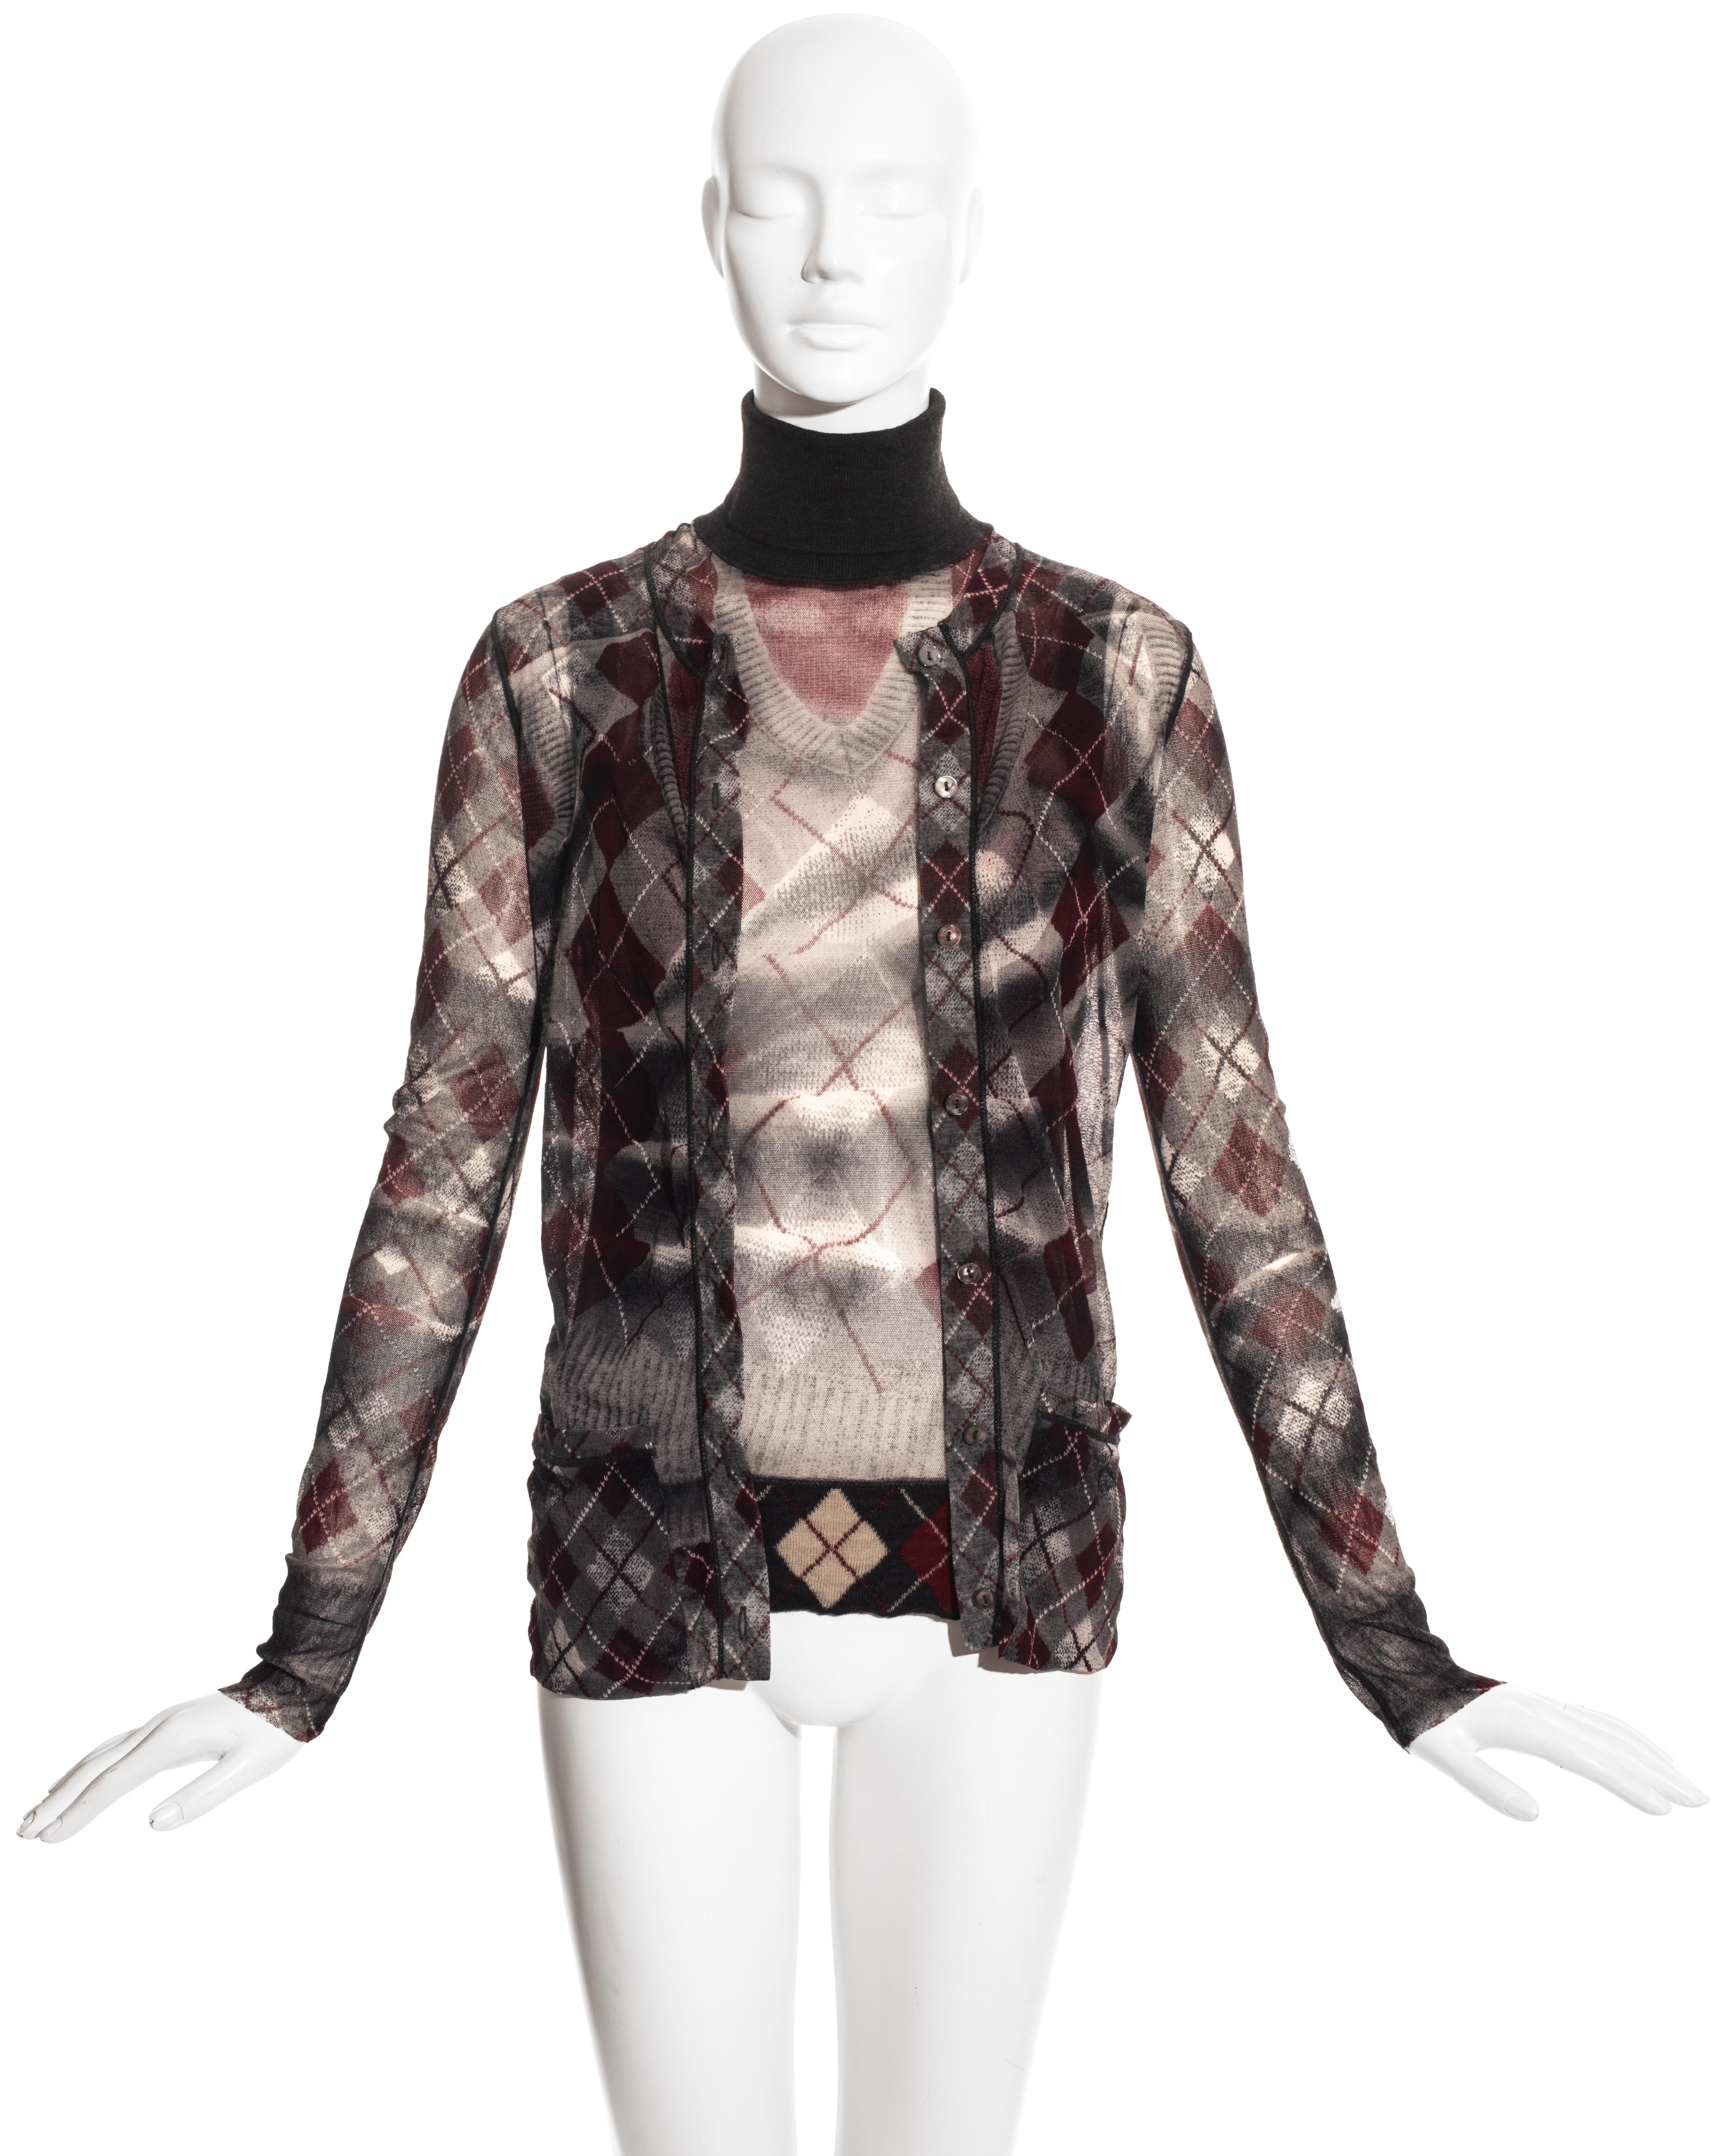 Jean Paul Gaultier grey and red argyle print mesh cardigan and sweater vest set. 

Fall-Winter 2004